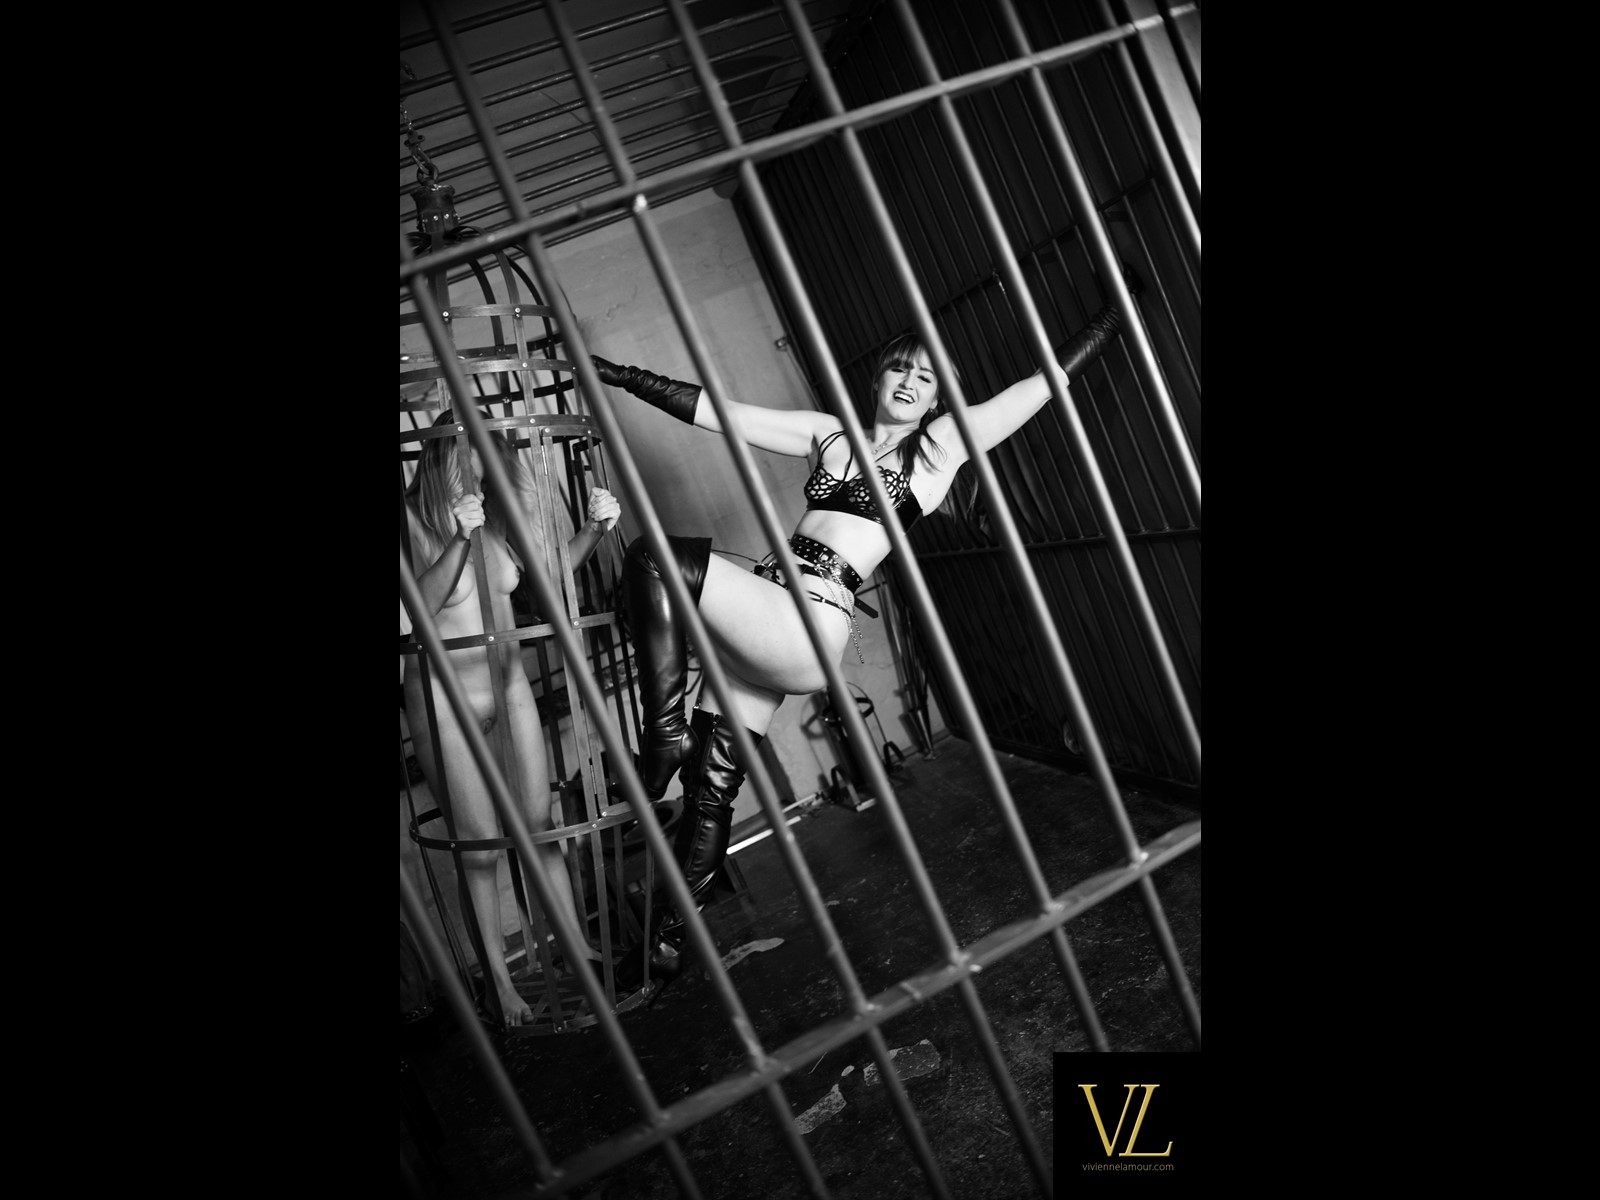 Tormenting the submissive female prisoner inside The Holding Cell at Celestial Studios Derby